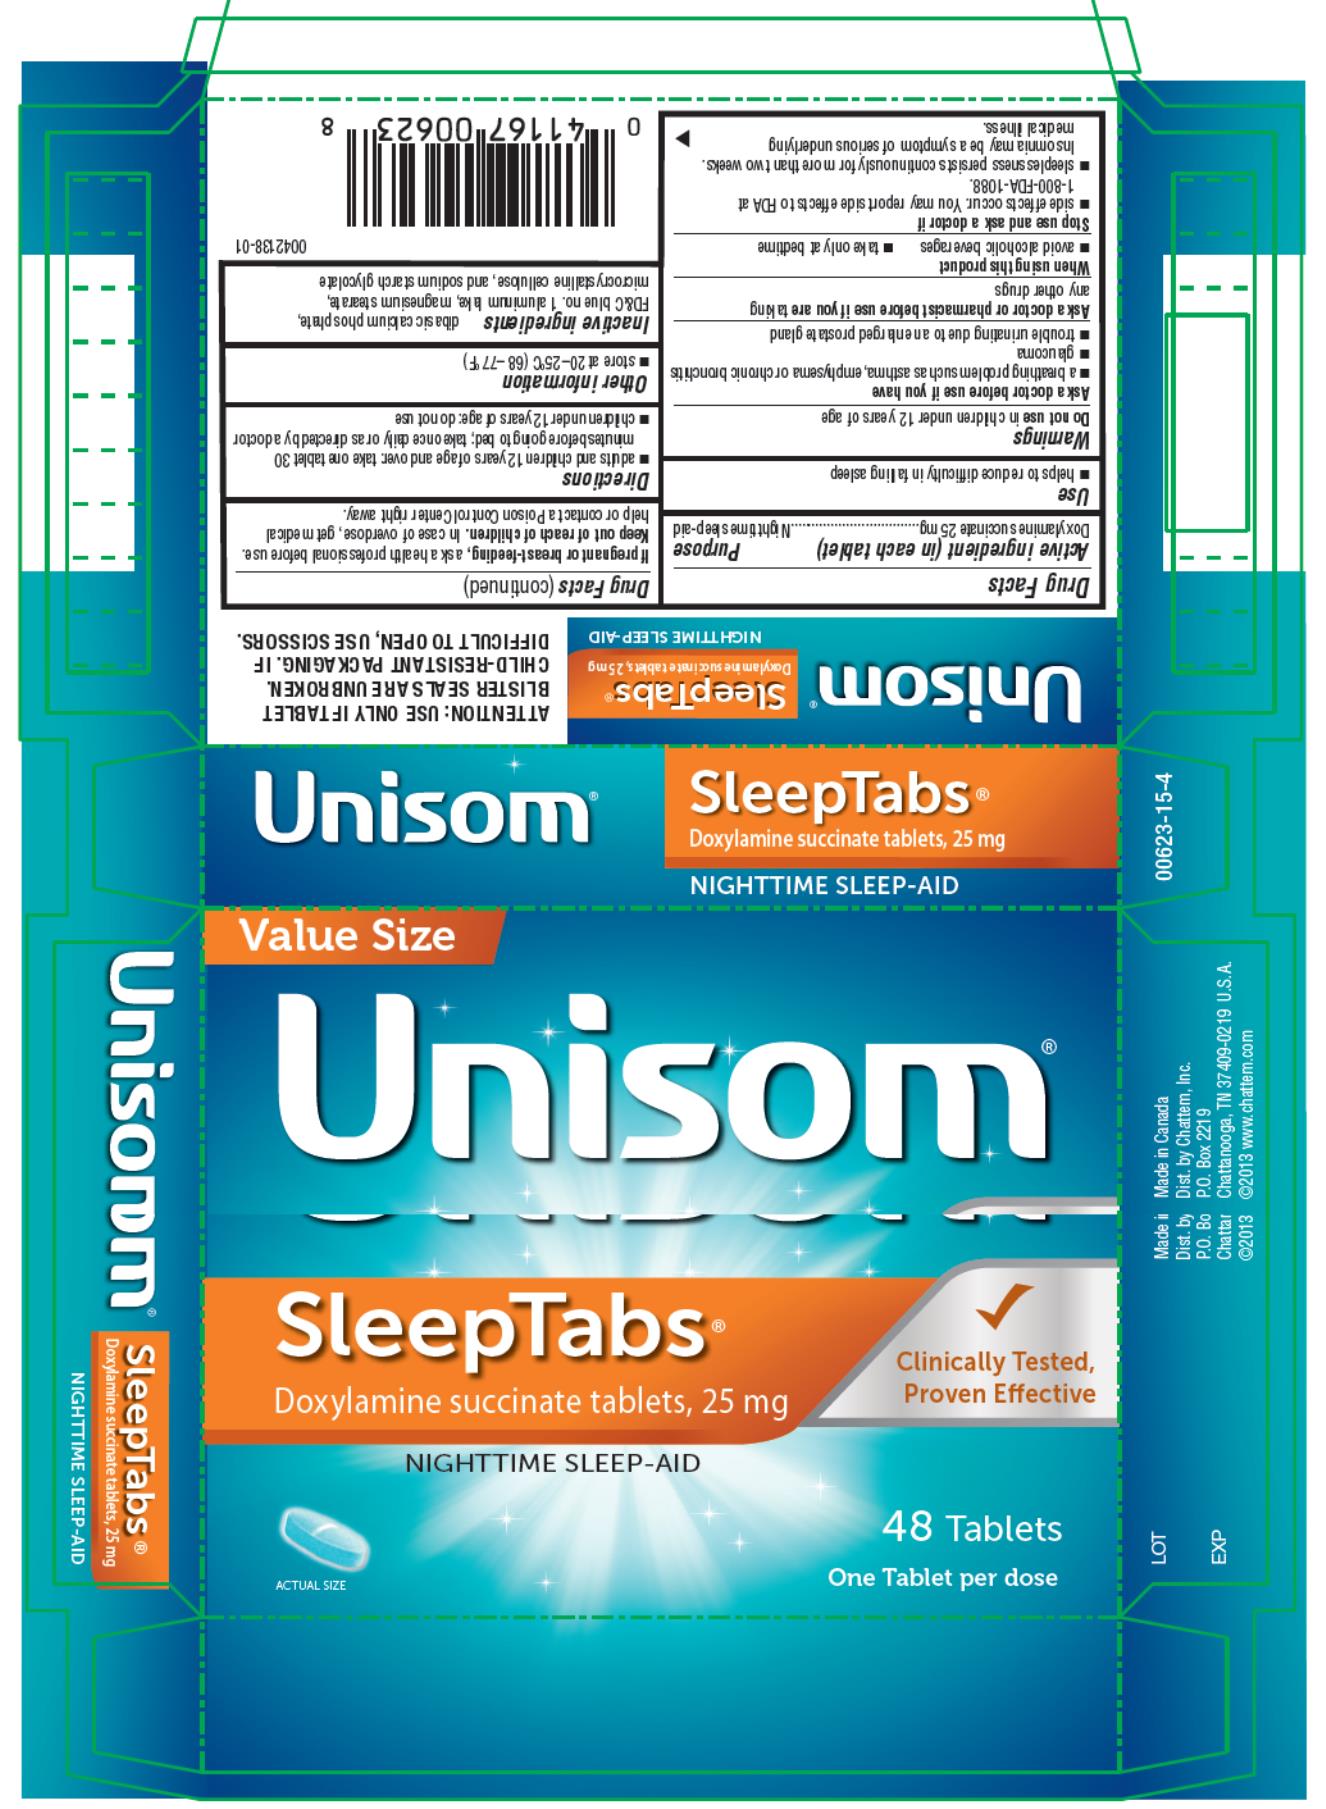 Value Size
Unisom® SleepTabs®
Doxylamine succinate tablets, 25 mg 
NIGHTTIME SLEEP-AID
48 Tablets
One Tablet per dose 
